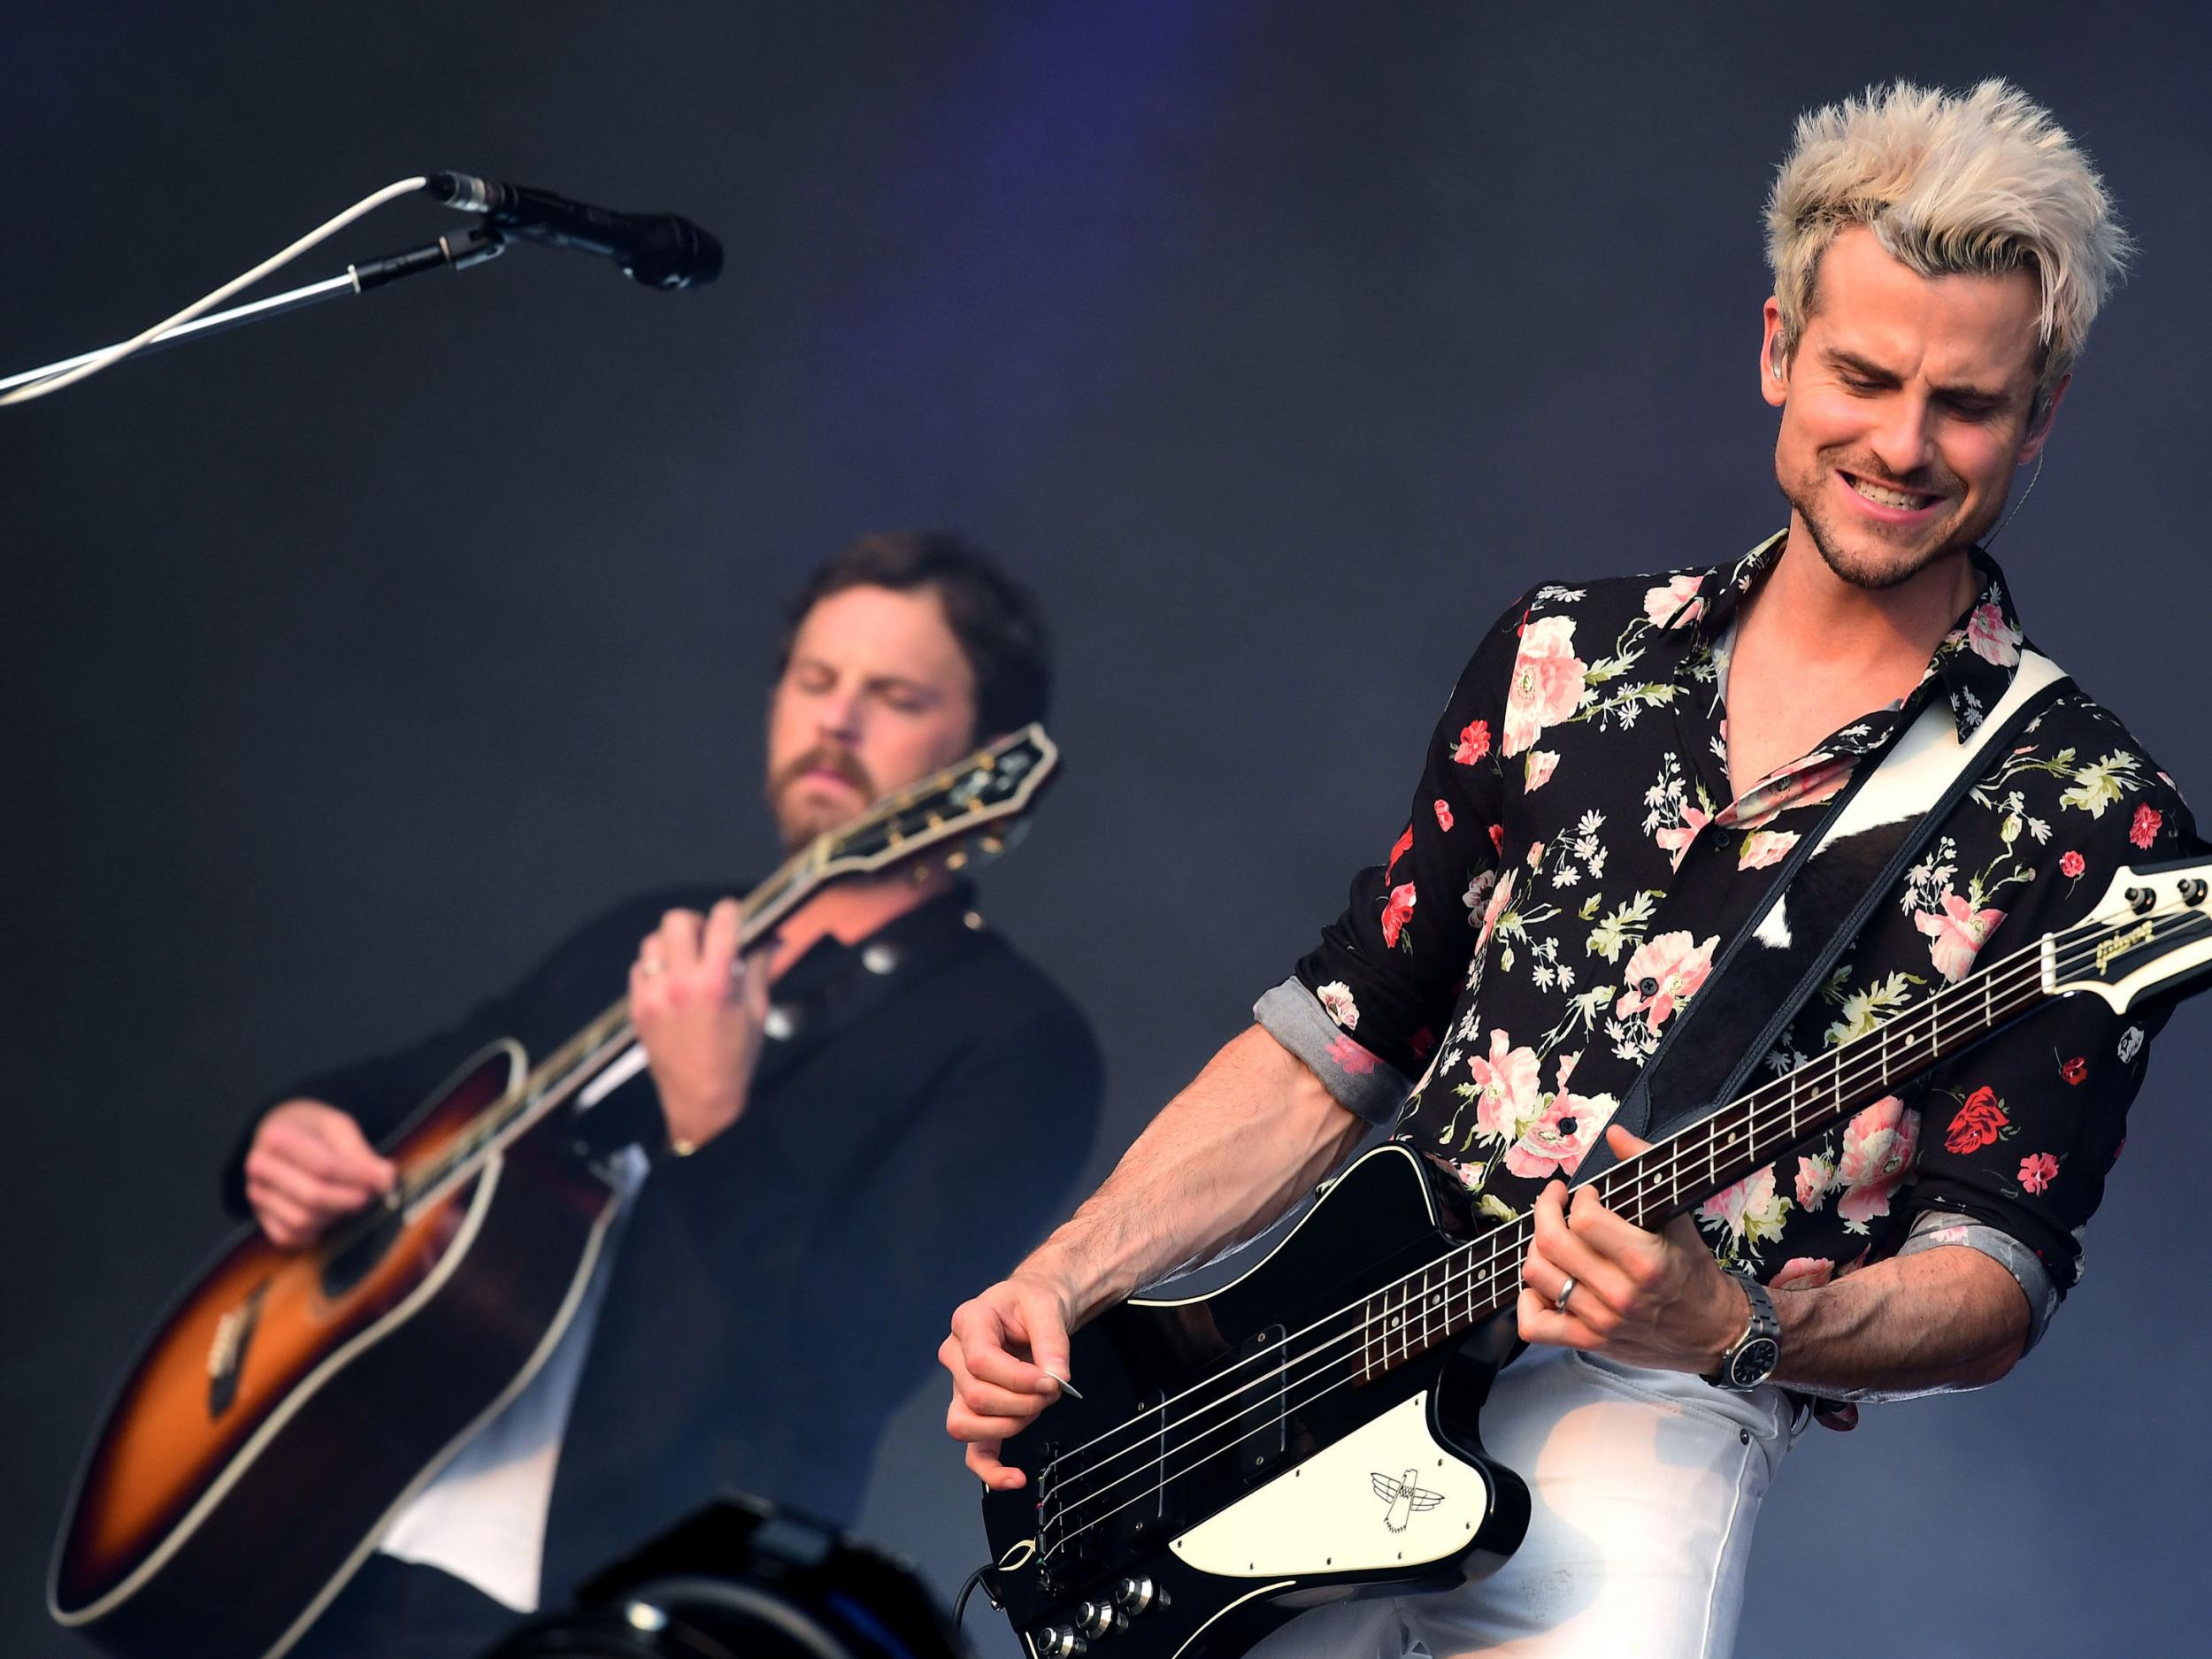 Caleb (left) and Jared Followill of Kings Of Leon perform at the British Summertime festival at Hyde Park, London